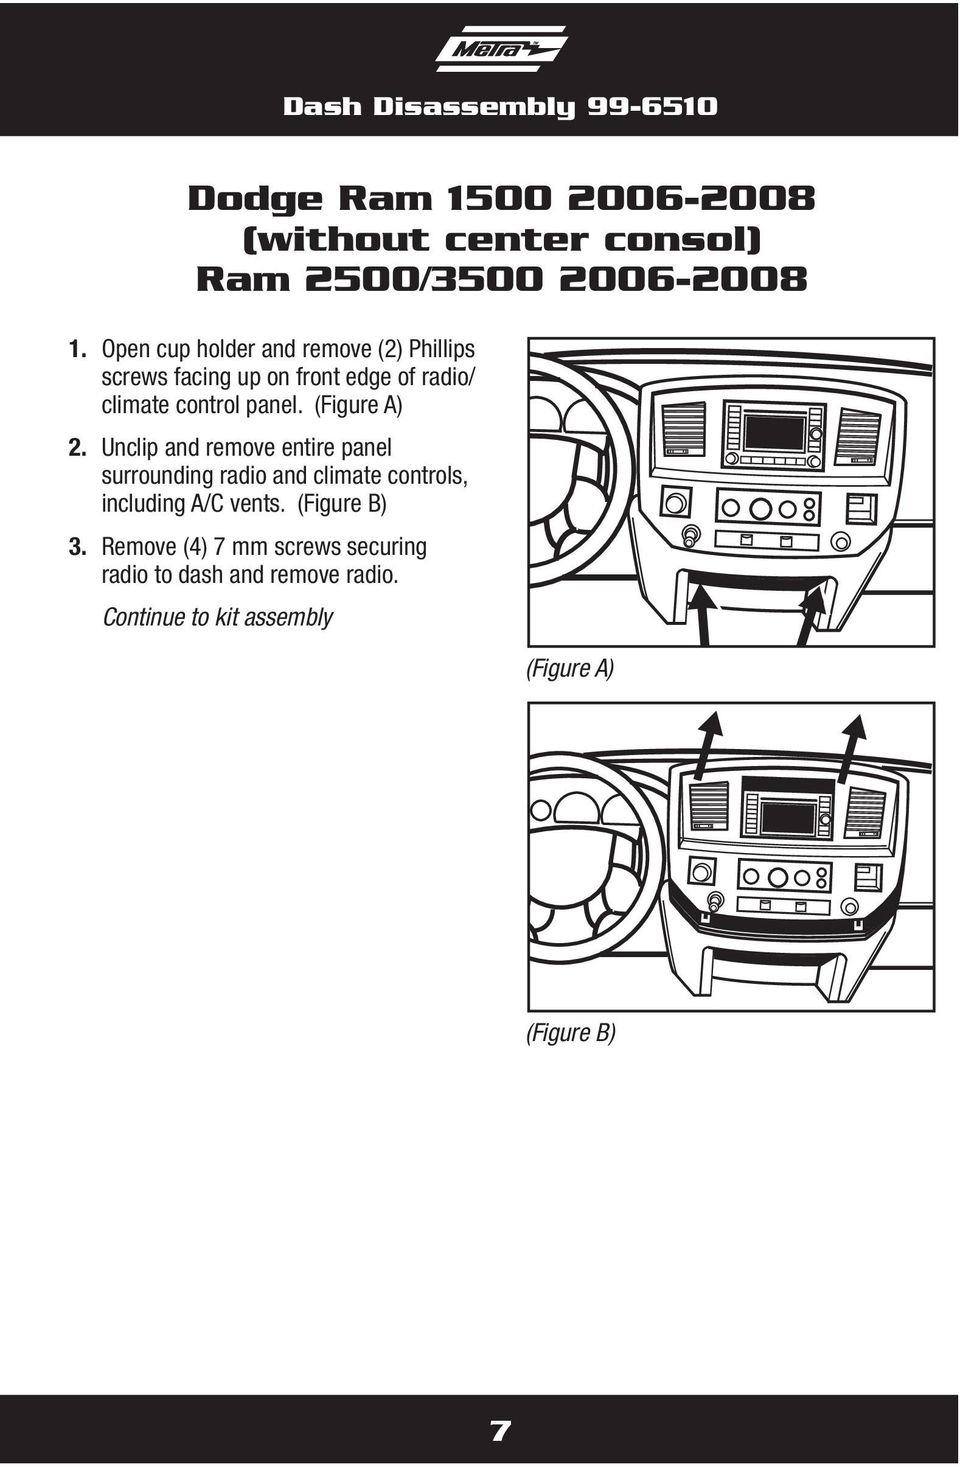 (Figure A) 2. Unclip and remove entire panel surrounding radio and climate controls, including A/C vents.